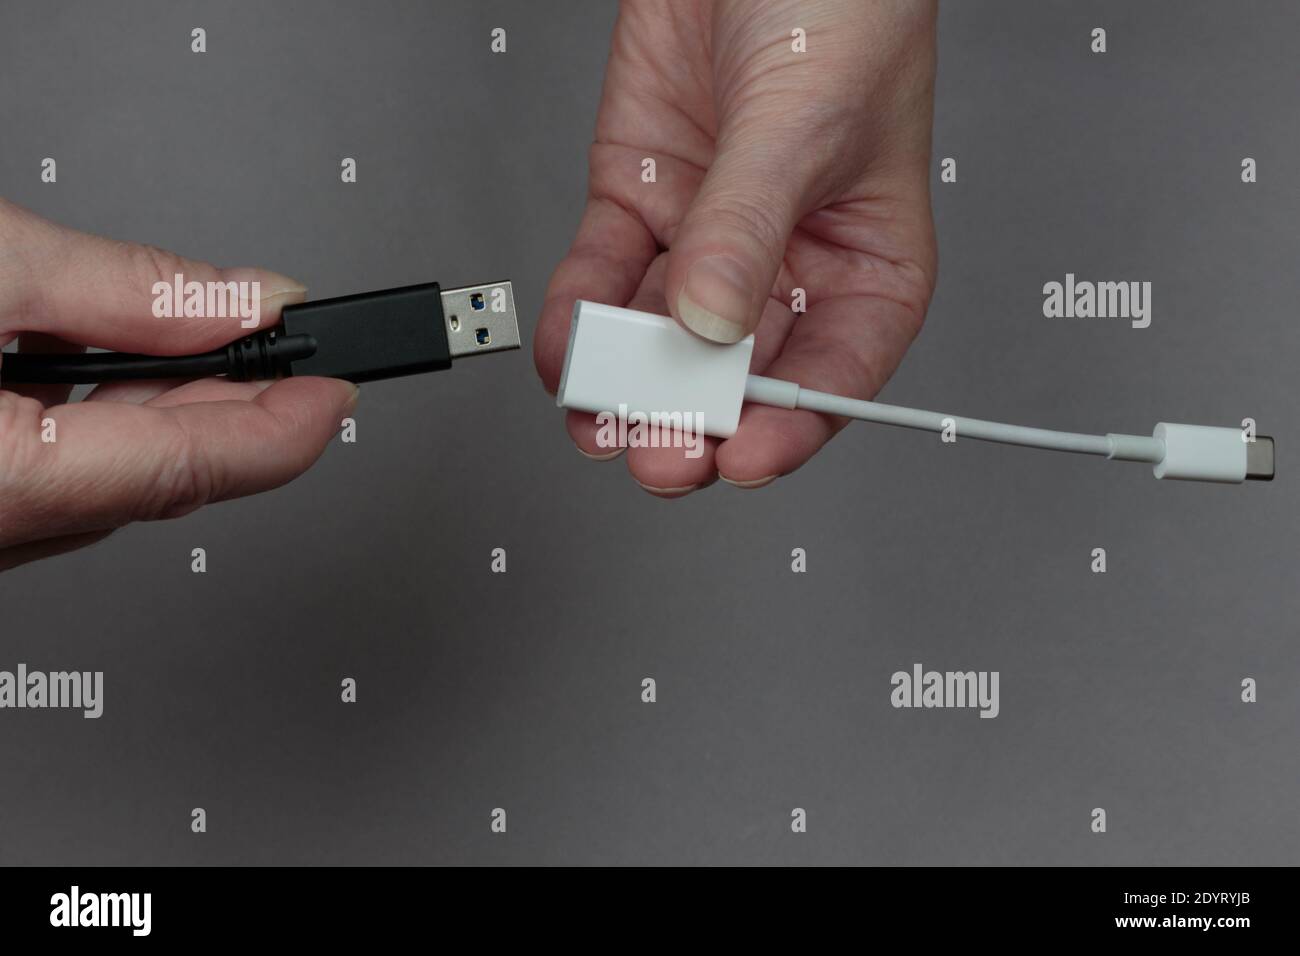 hands connecting a usb cable to a usb-c to usb adaptor on a gray background Stock Photo